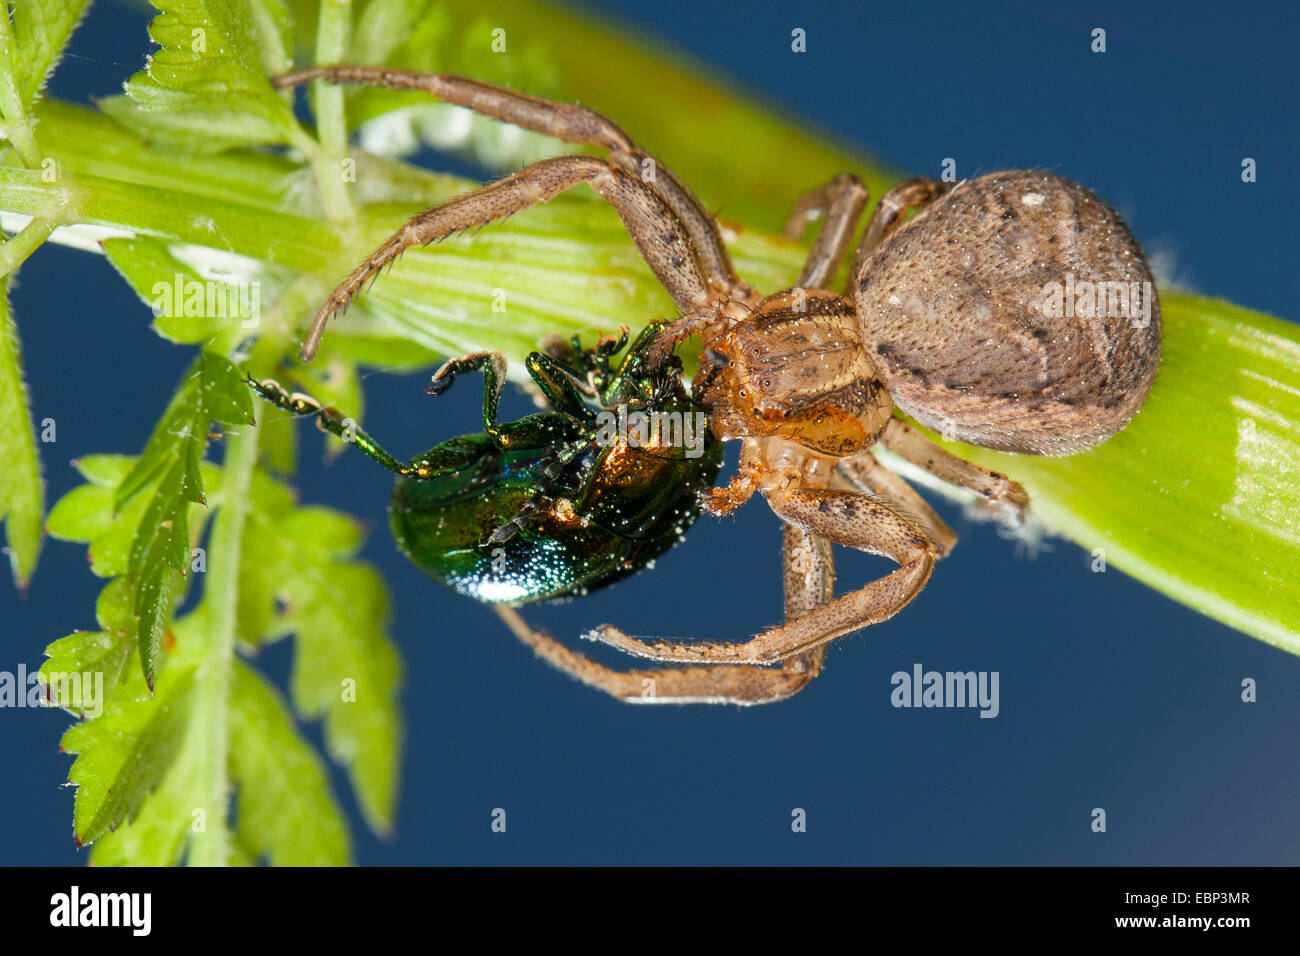 Erratic Crab-spider, crab spider (Xysticus cf. erraticus), with caught leaf beetle, Germany Stock Photo